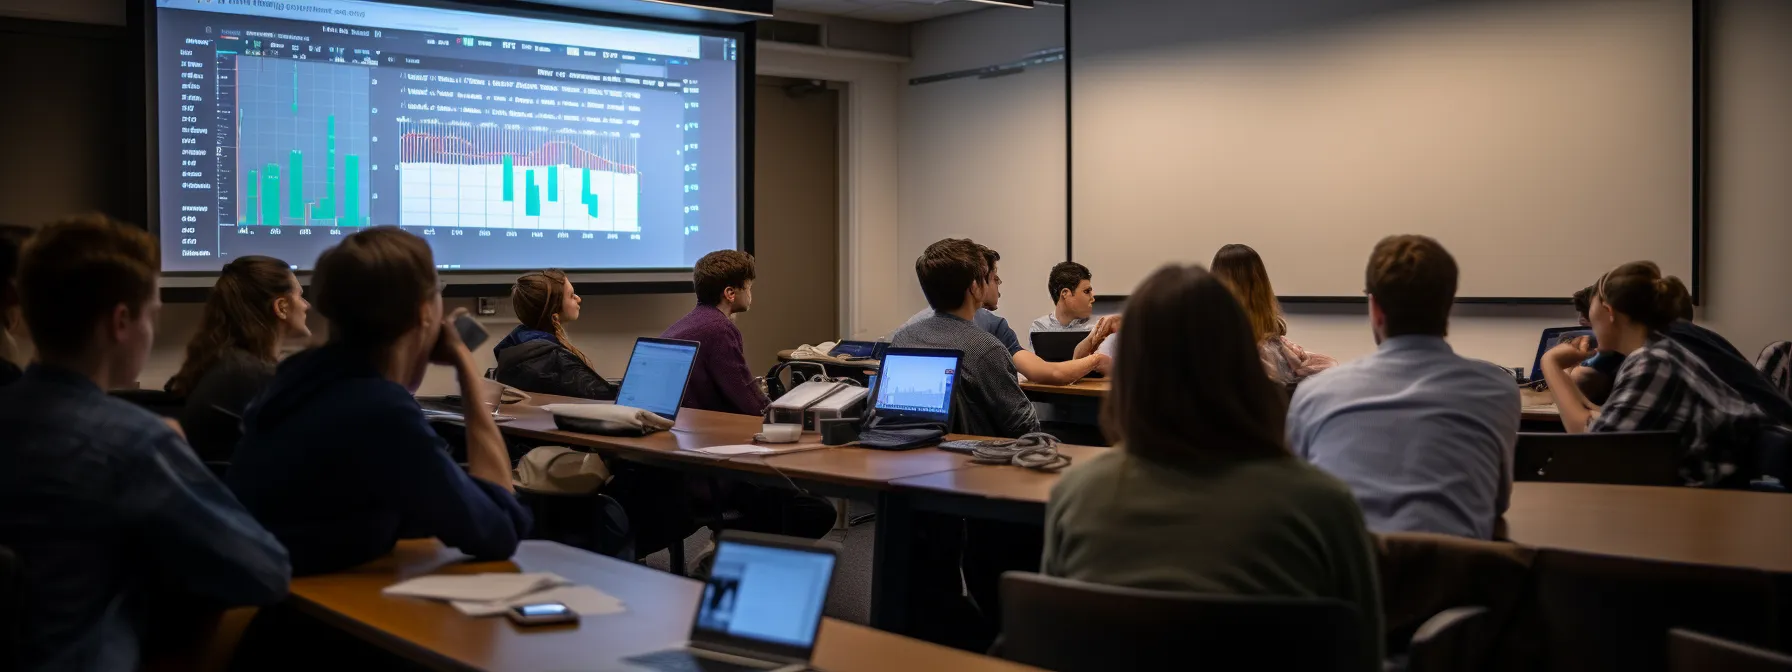 a group of students sitting in a classroom, looking at a computer screen displaying google analytics and taking notes.